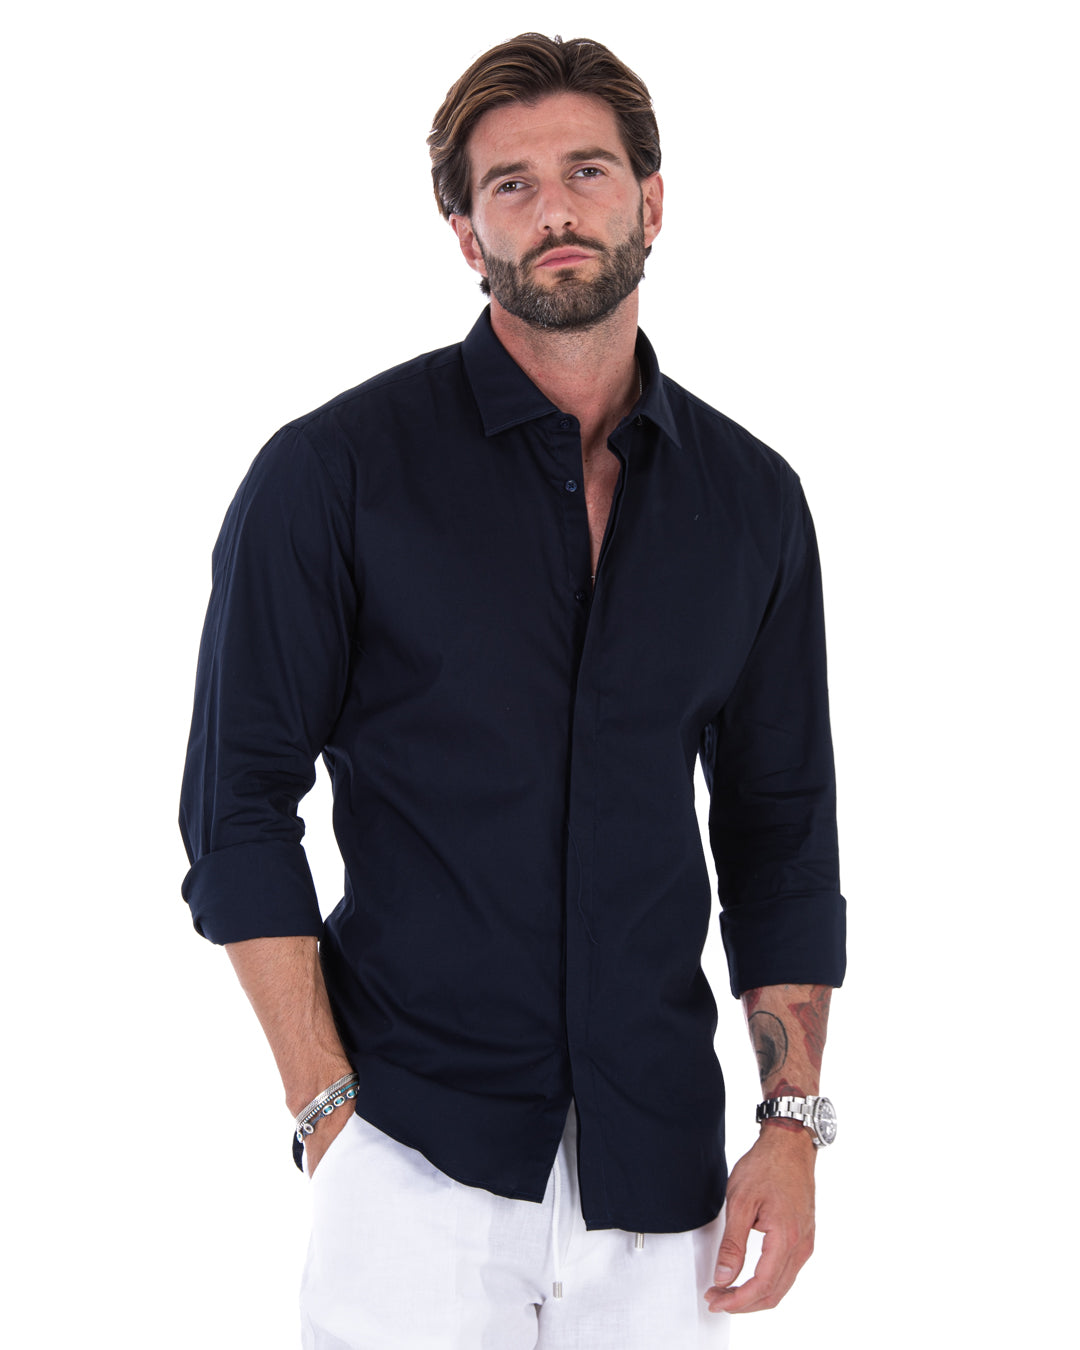 Shirt - classic blue basic in cotton